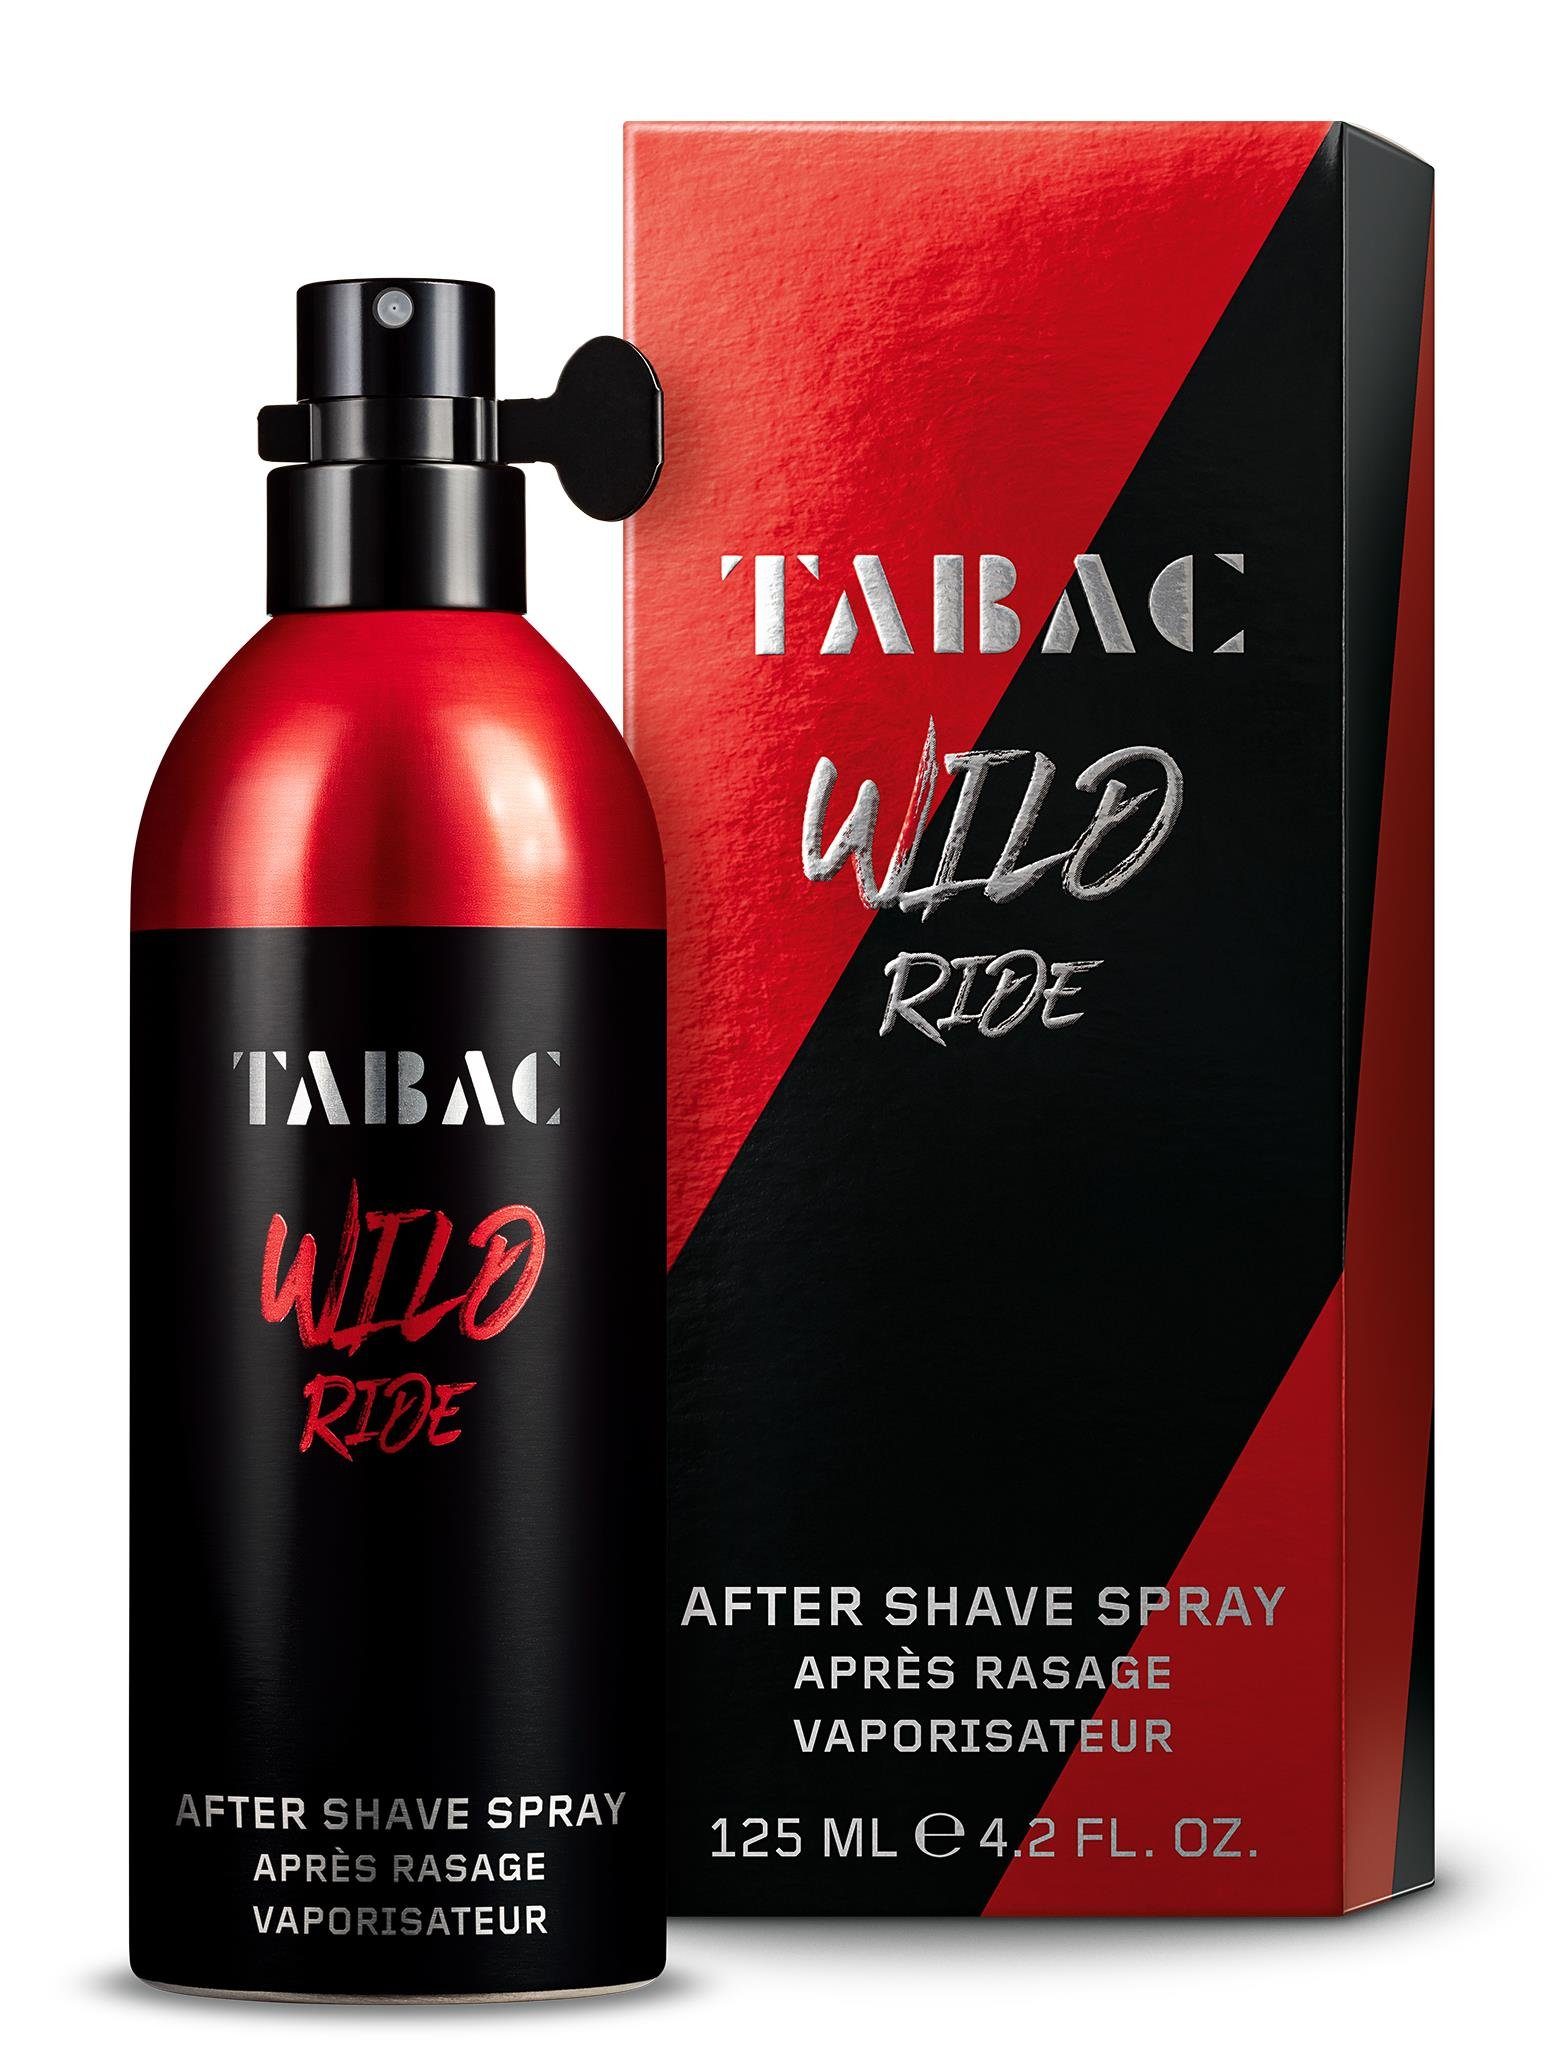 Ride Shave ml Tabac Tabac Gesichts-Reinigungslotion 125 Wild Ride After Lotion Wild